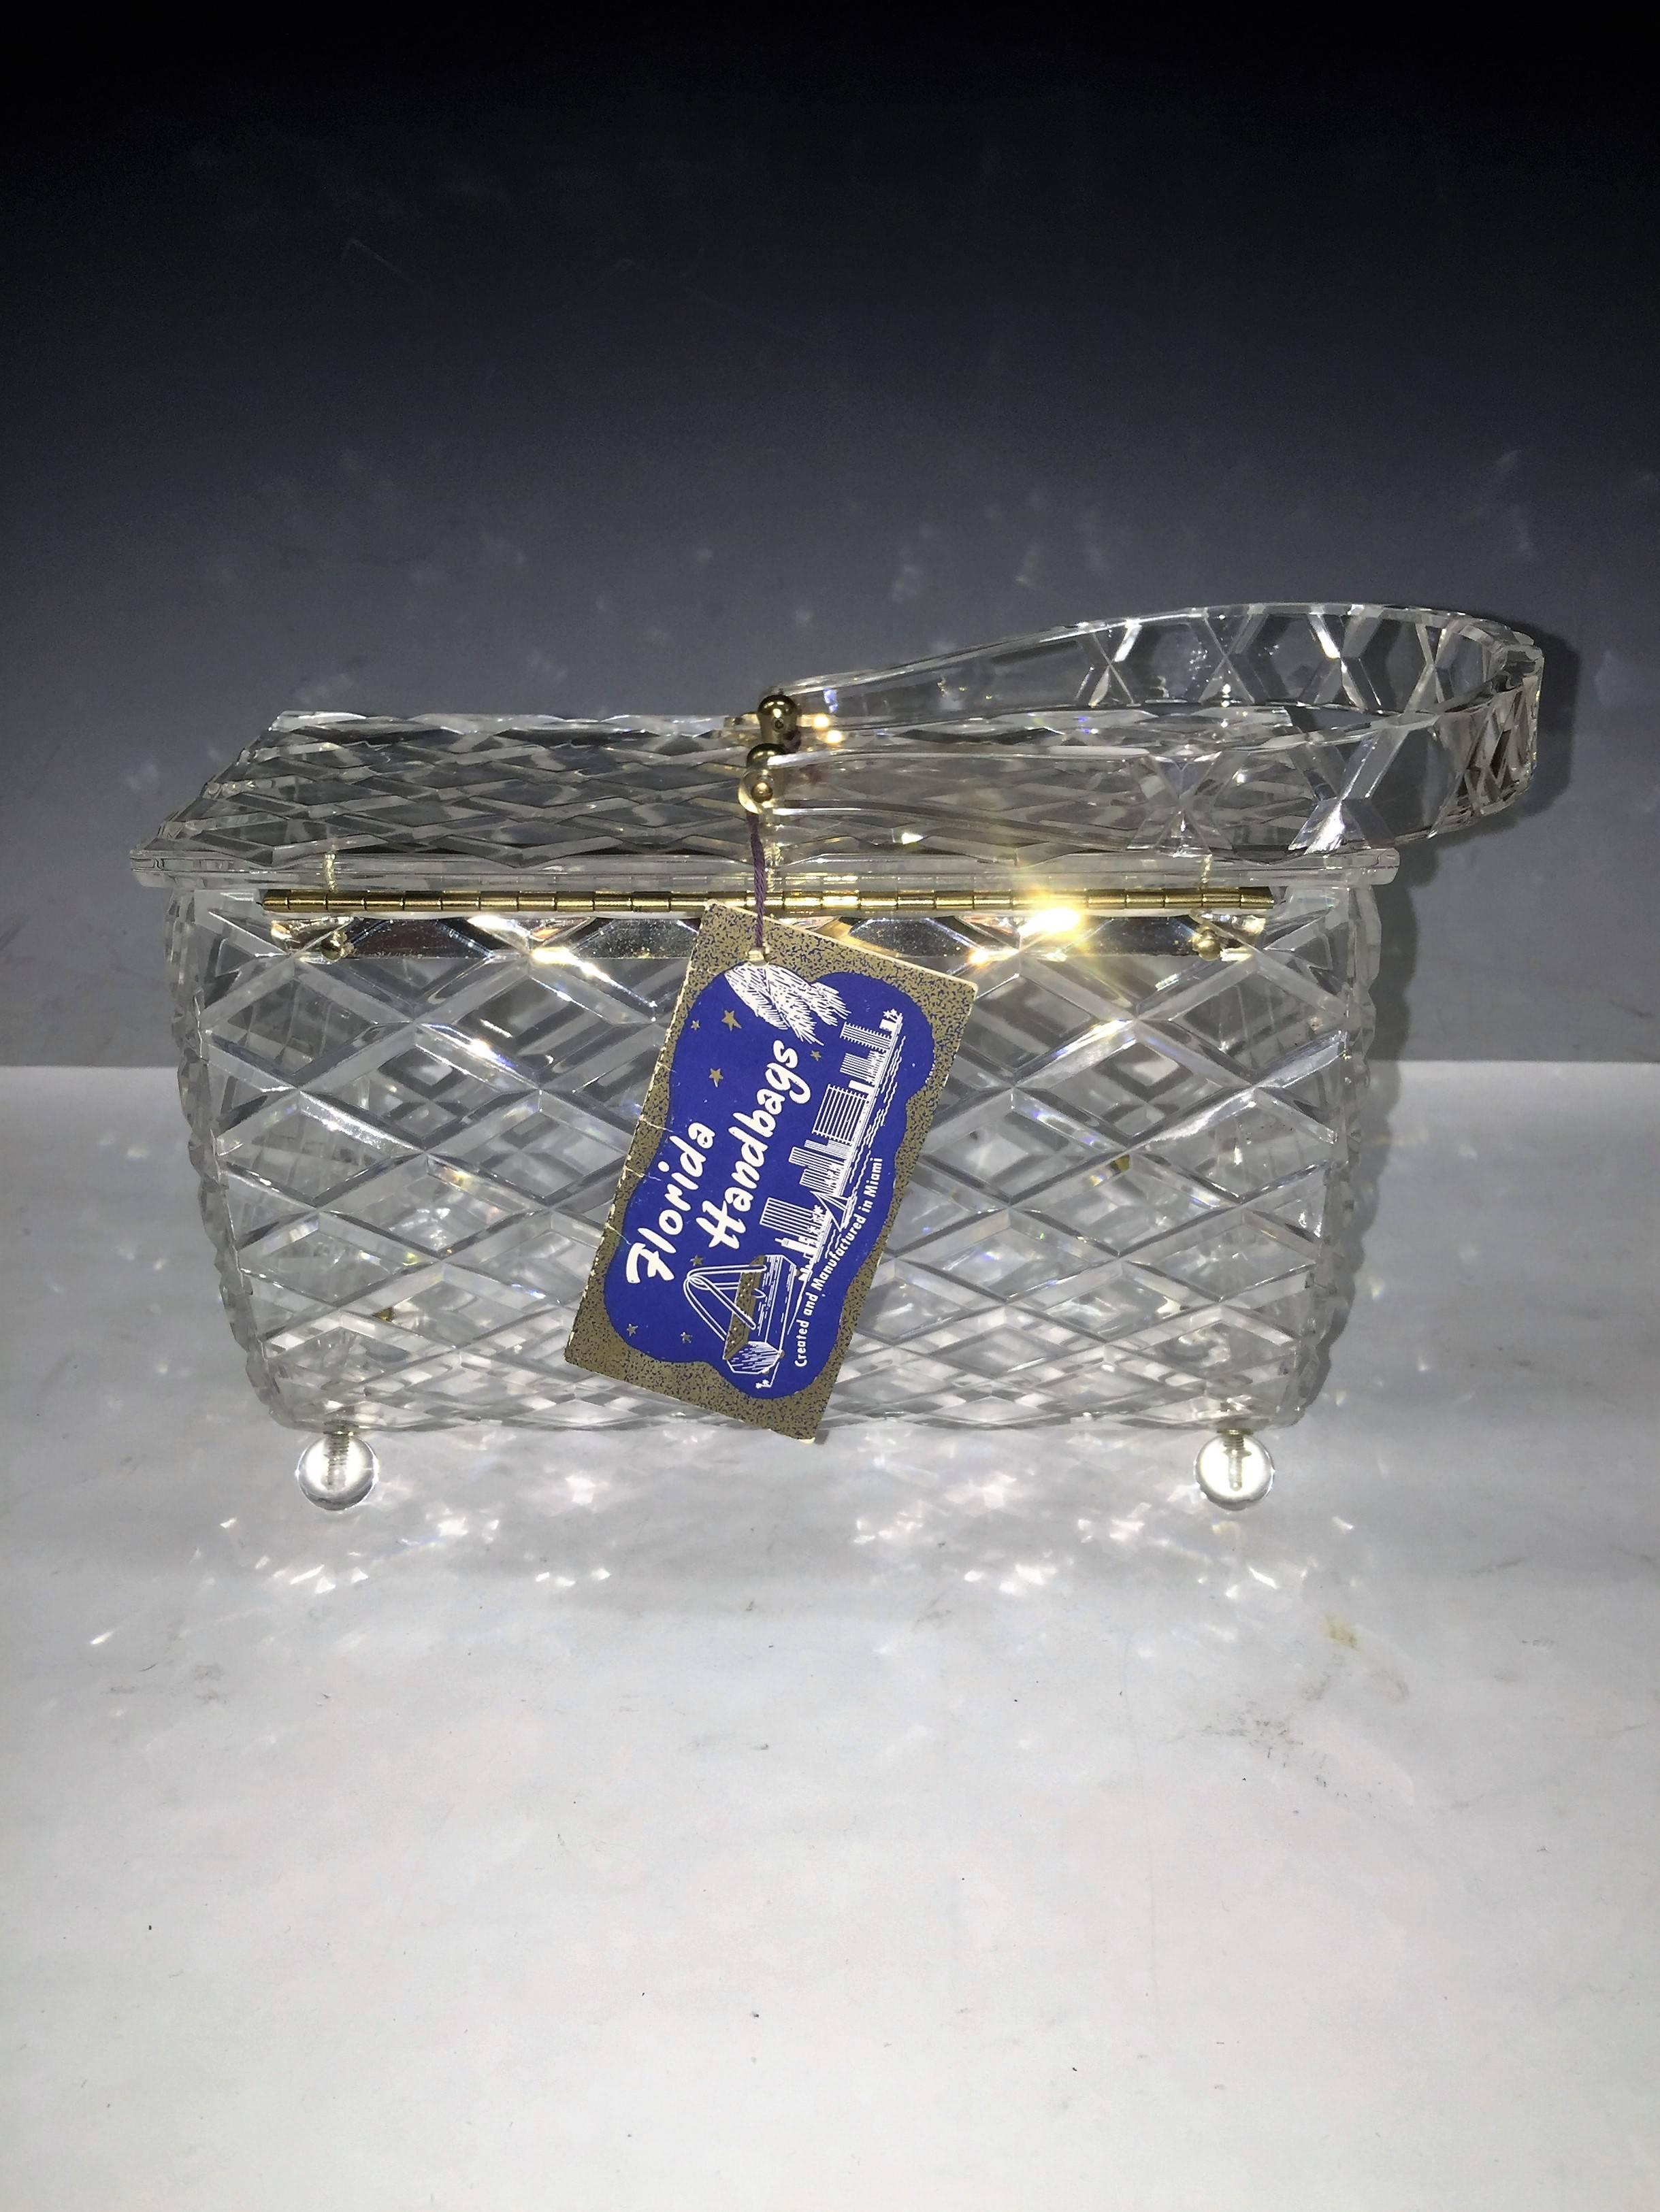 Mint Condition Never Used Large Lucite Handbag with Original Tag that reads Florida Handbags.Fantastic Style and Design of a Thick hand Carved Clear Lucite Handbag with Beautiful Side Attached Handle.Great Geometric Diamond Design on this